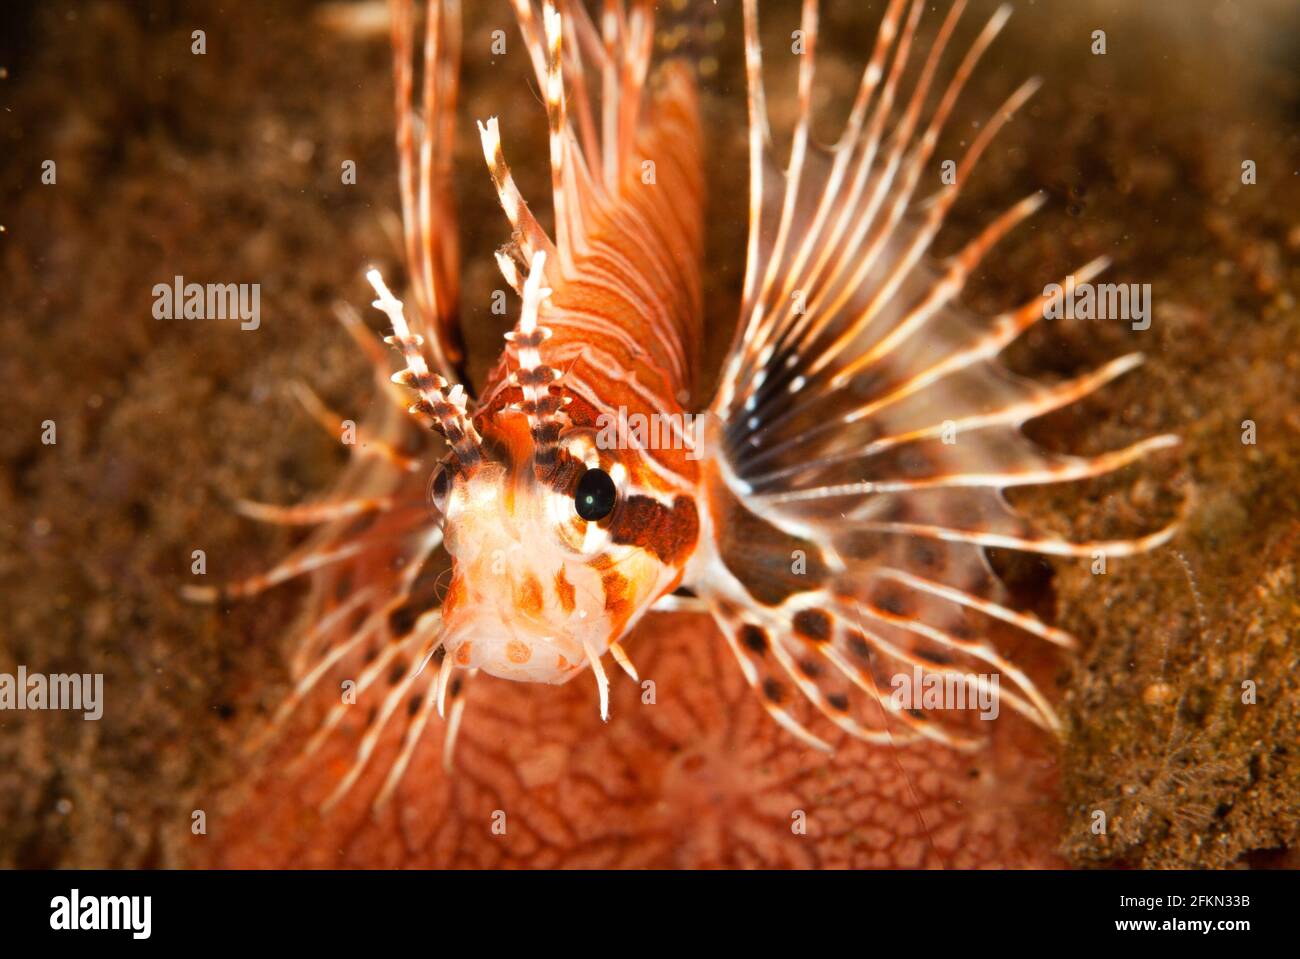 Image of a Spotfin Lionfish captured on a muck dive at Dauin, Dumaguete, Philippines Stock Photo